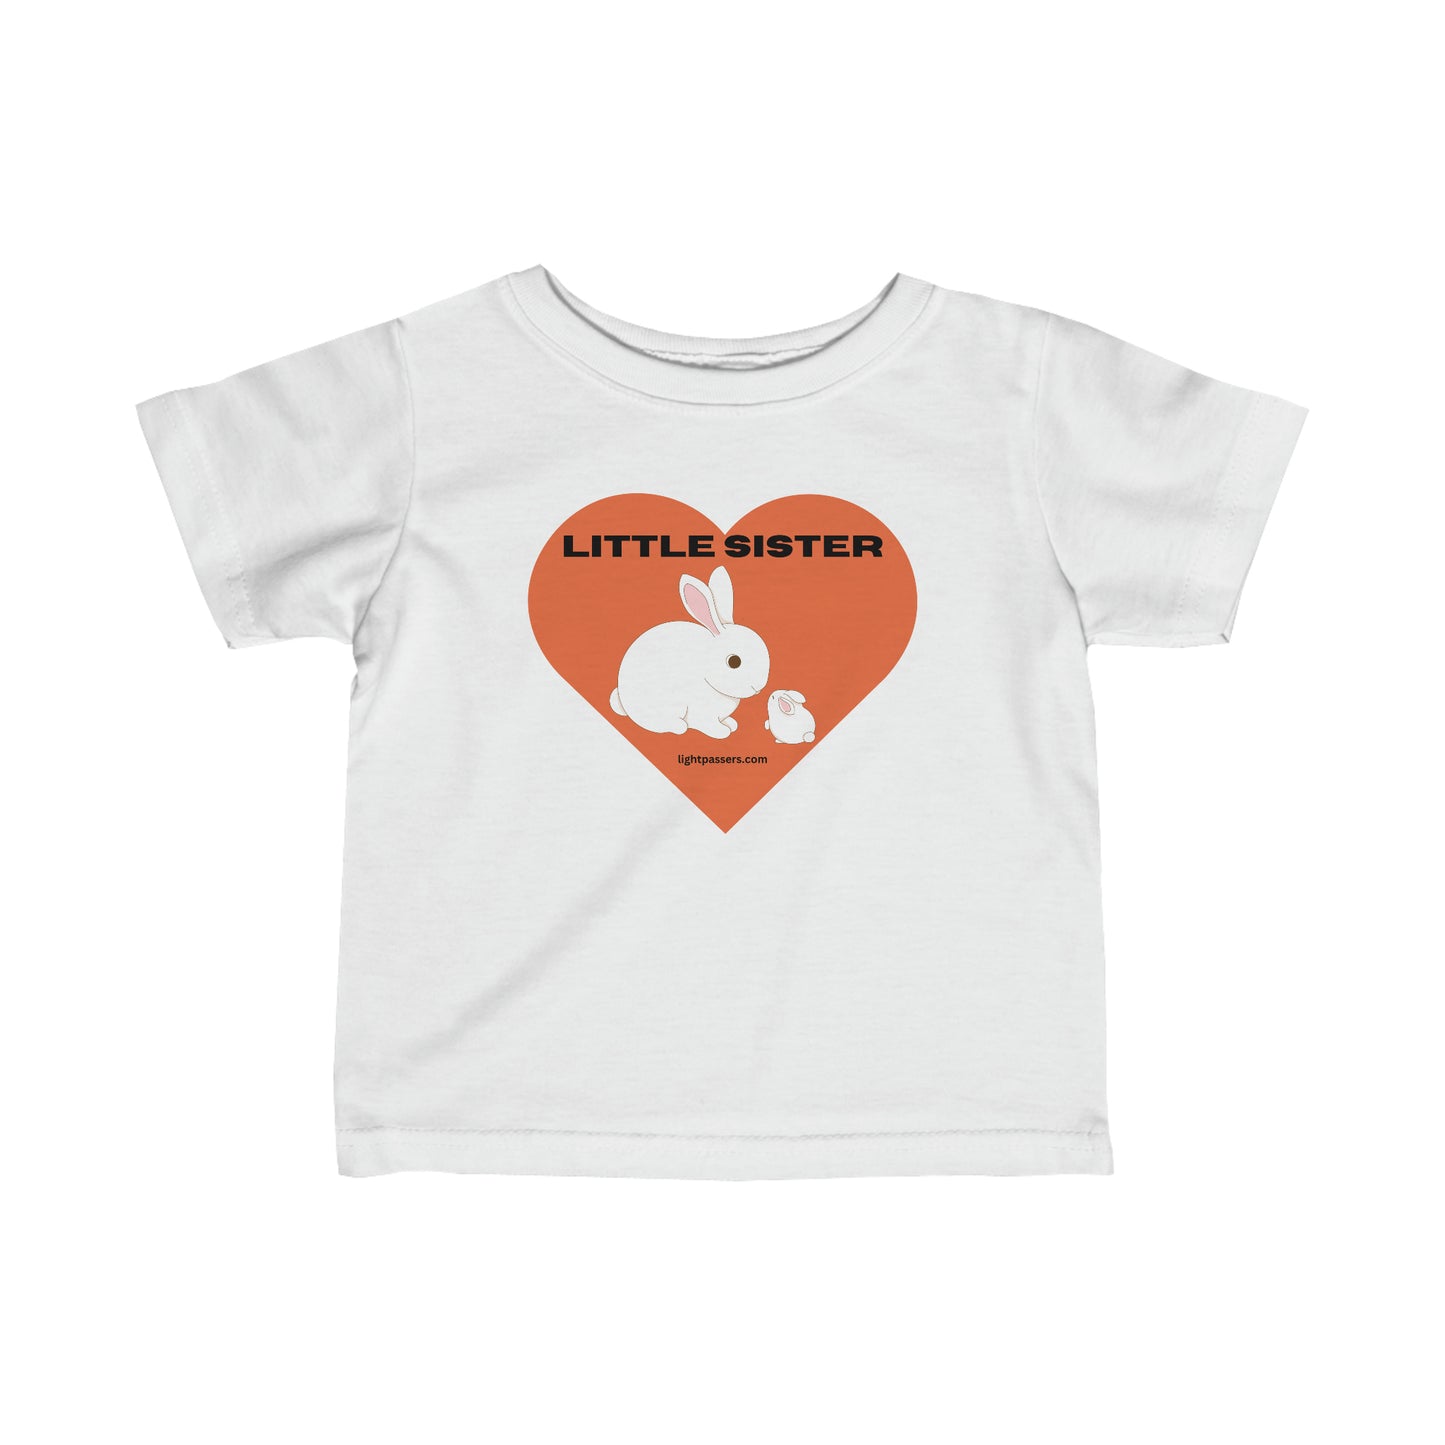 A white baby t-shirt featuring a rabbit and heart design, with ribbed knitting for durability and taped shoulders for a comfy fit. Ideal for younglings, this tee is made of 100% combed ringspun cotton.